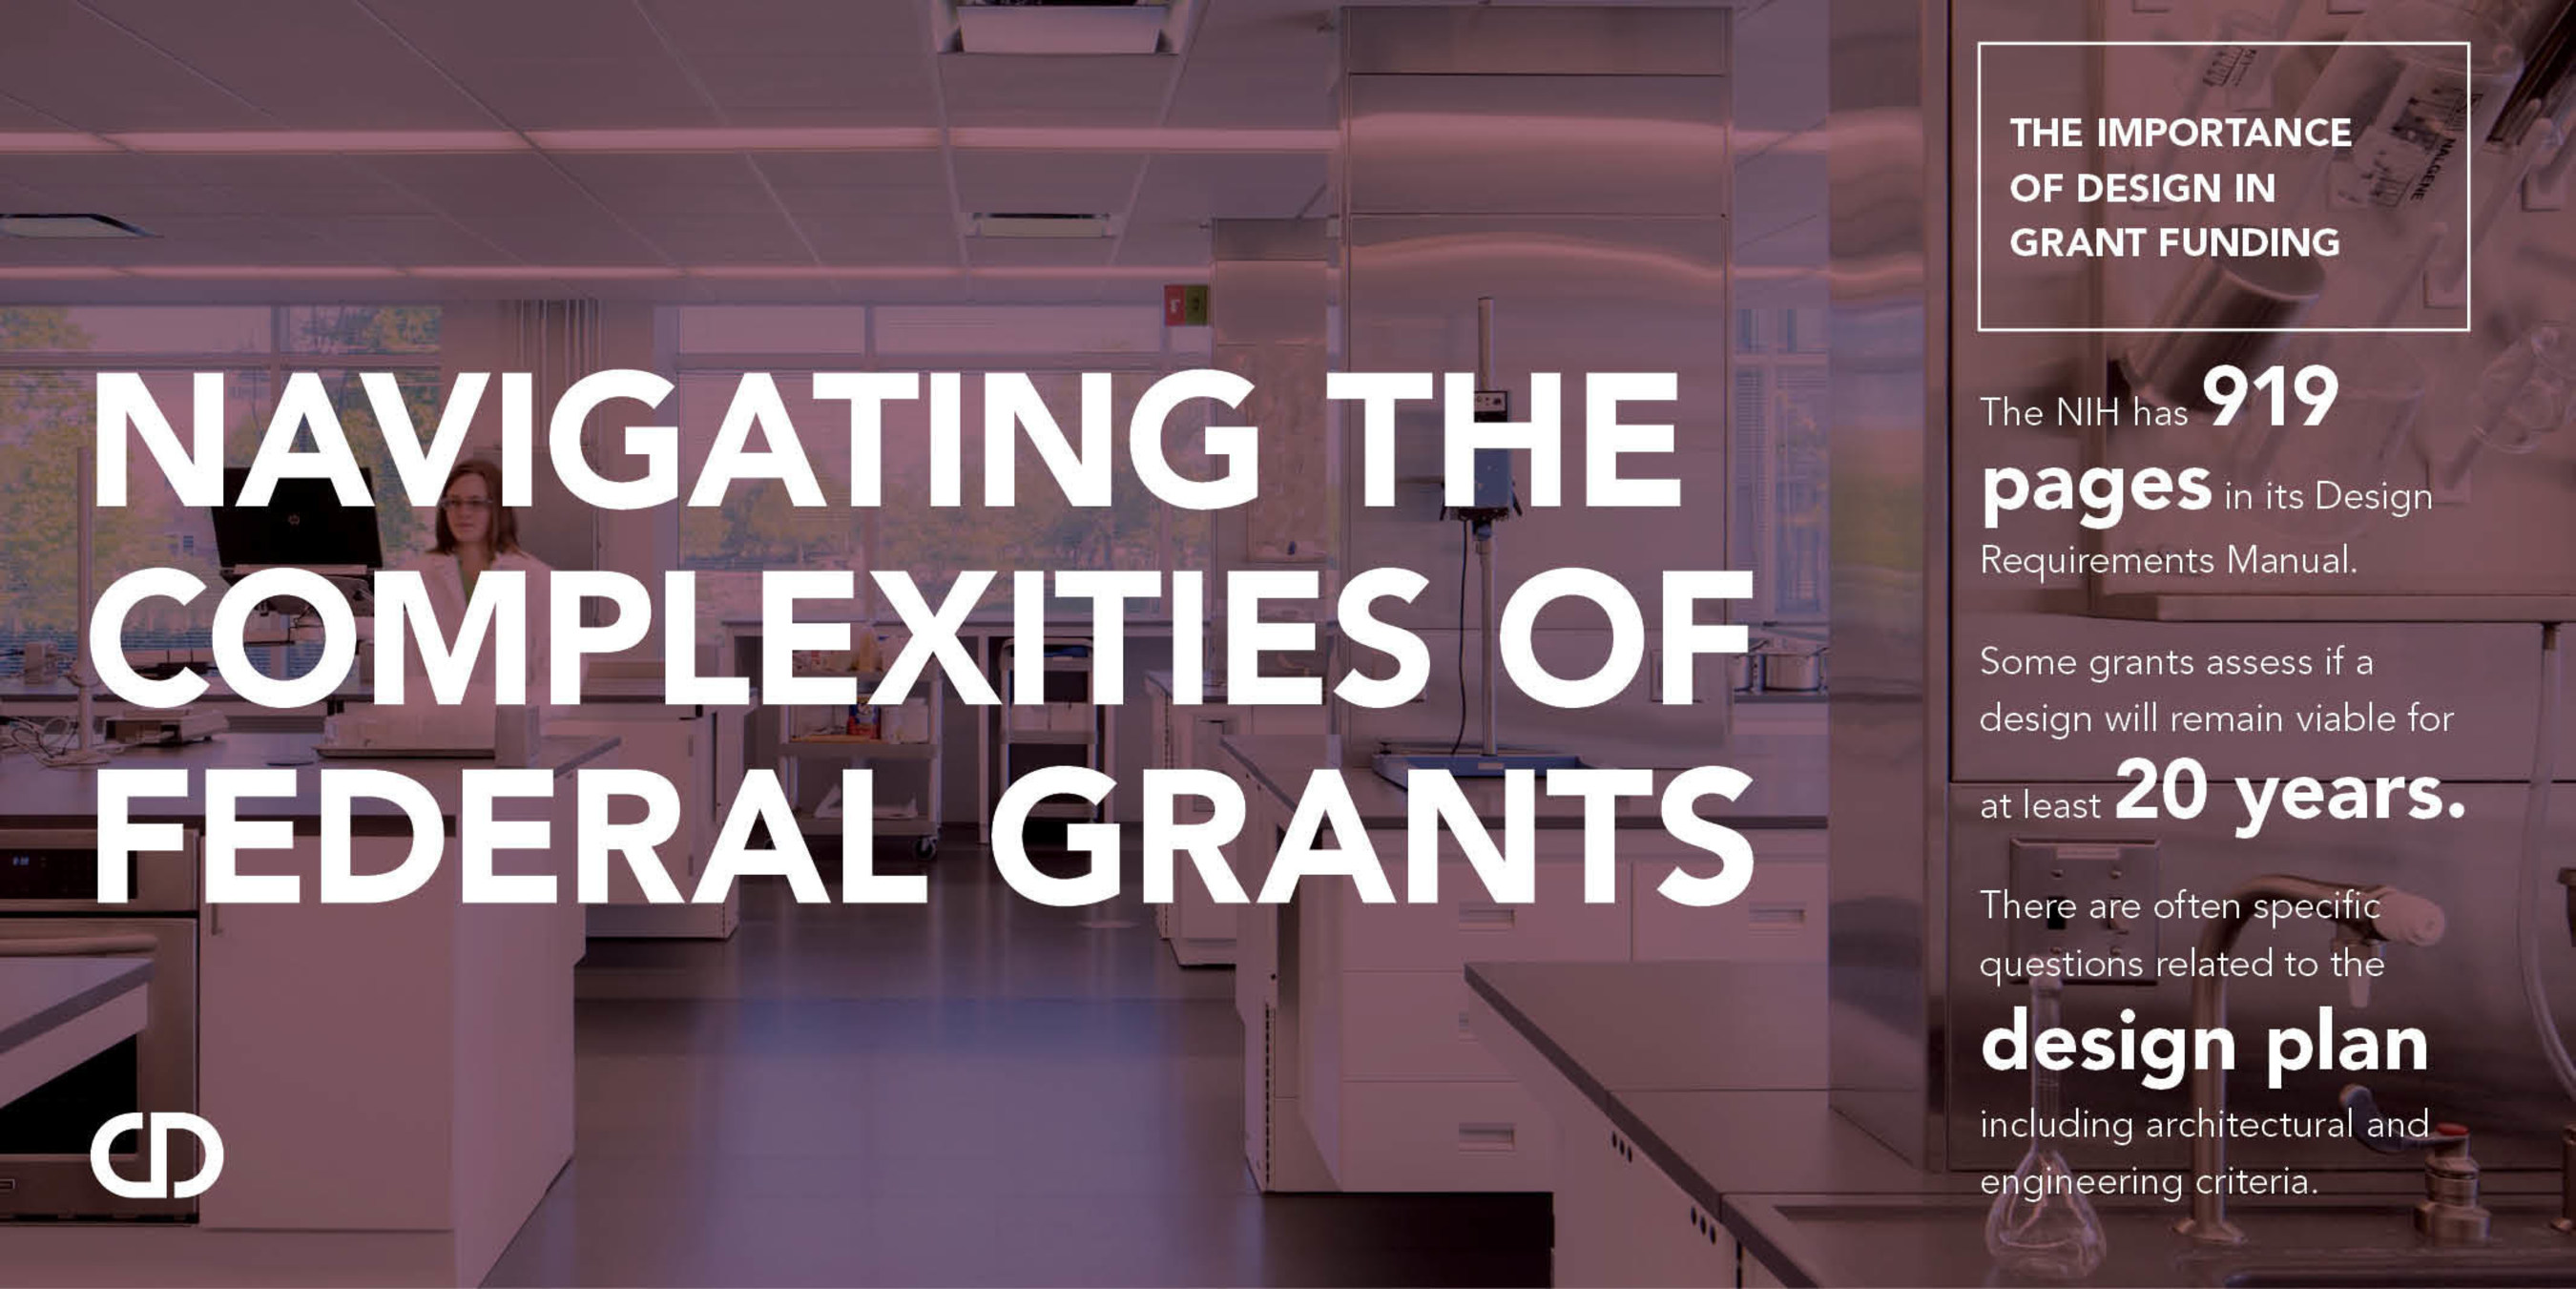 CannonDesign releases new infographic to help universities navigate the complexities of federal grants.